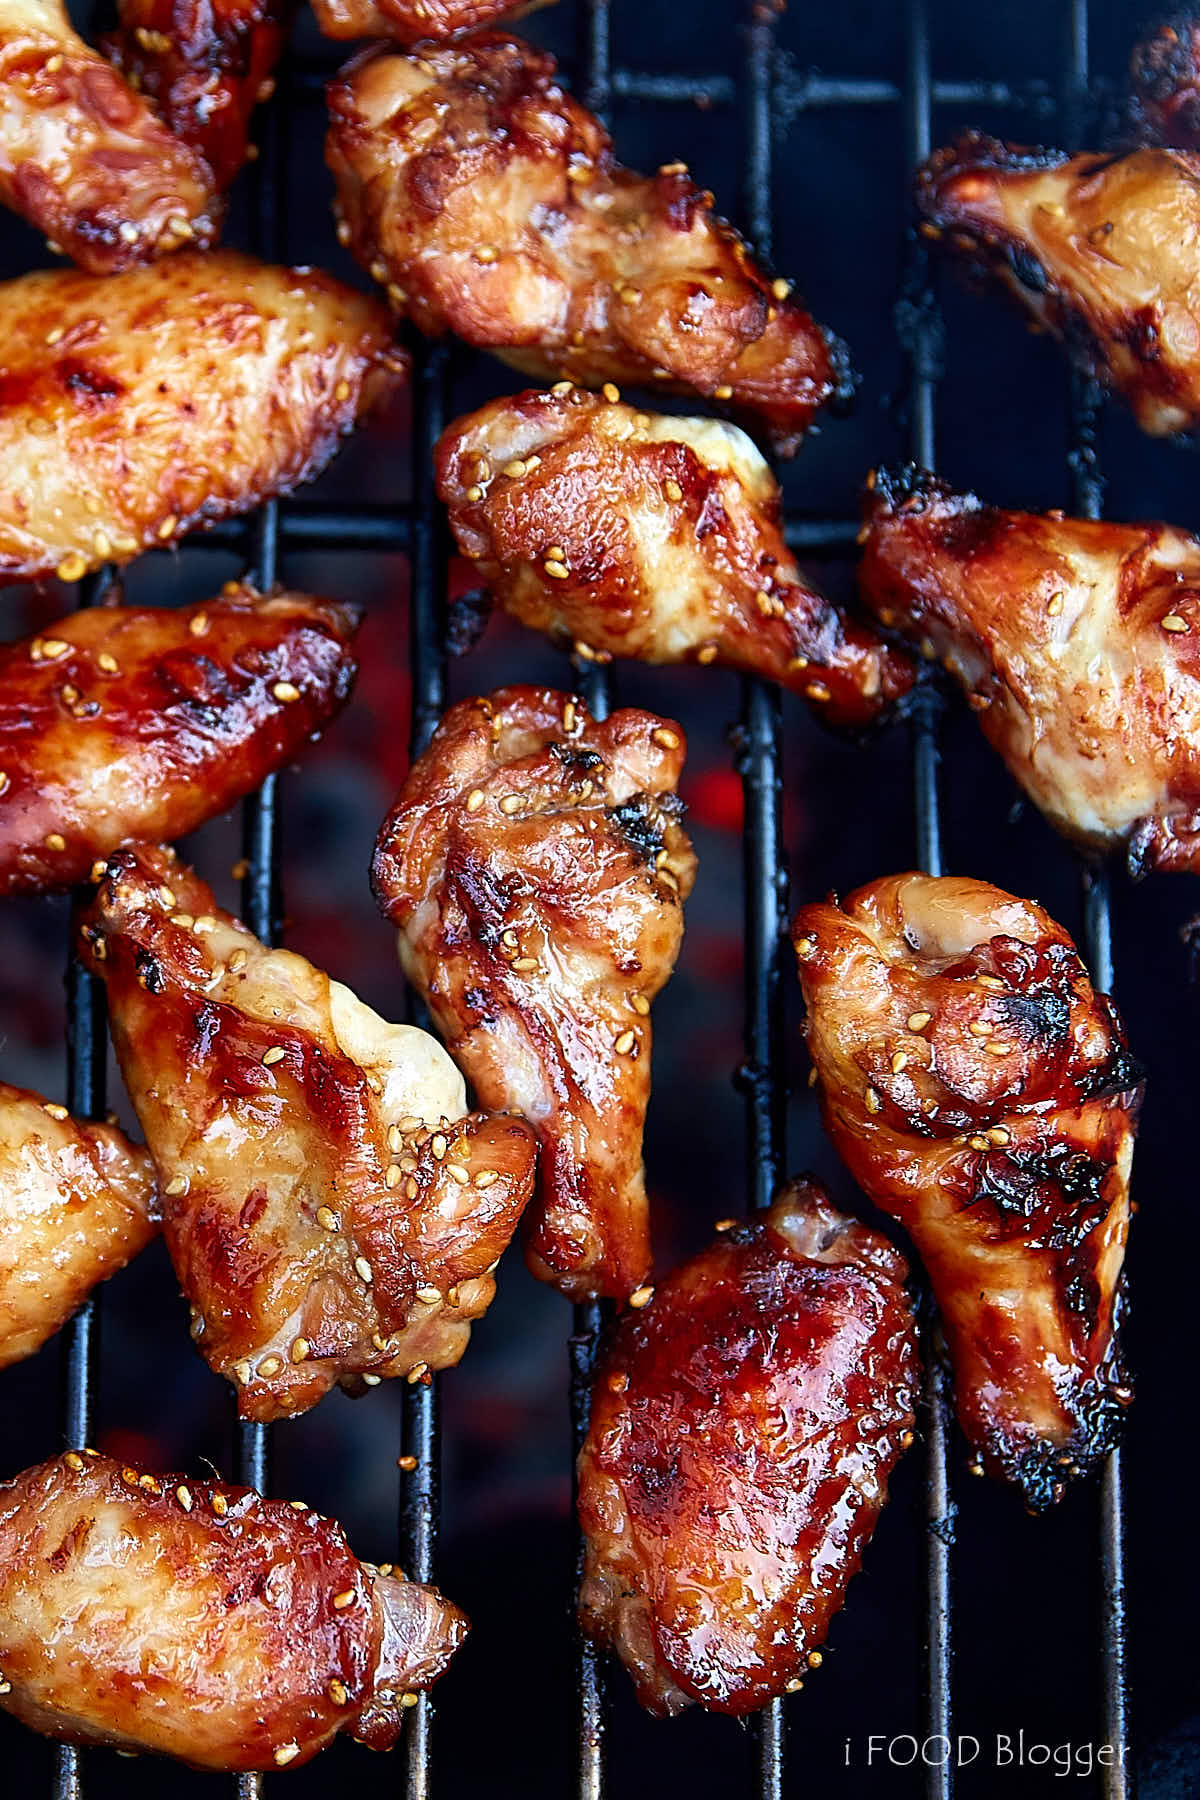 Top down view of grilled chicken wings, fully cooked, crispy and browned, on a grill grate over a bed of charcoal.